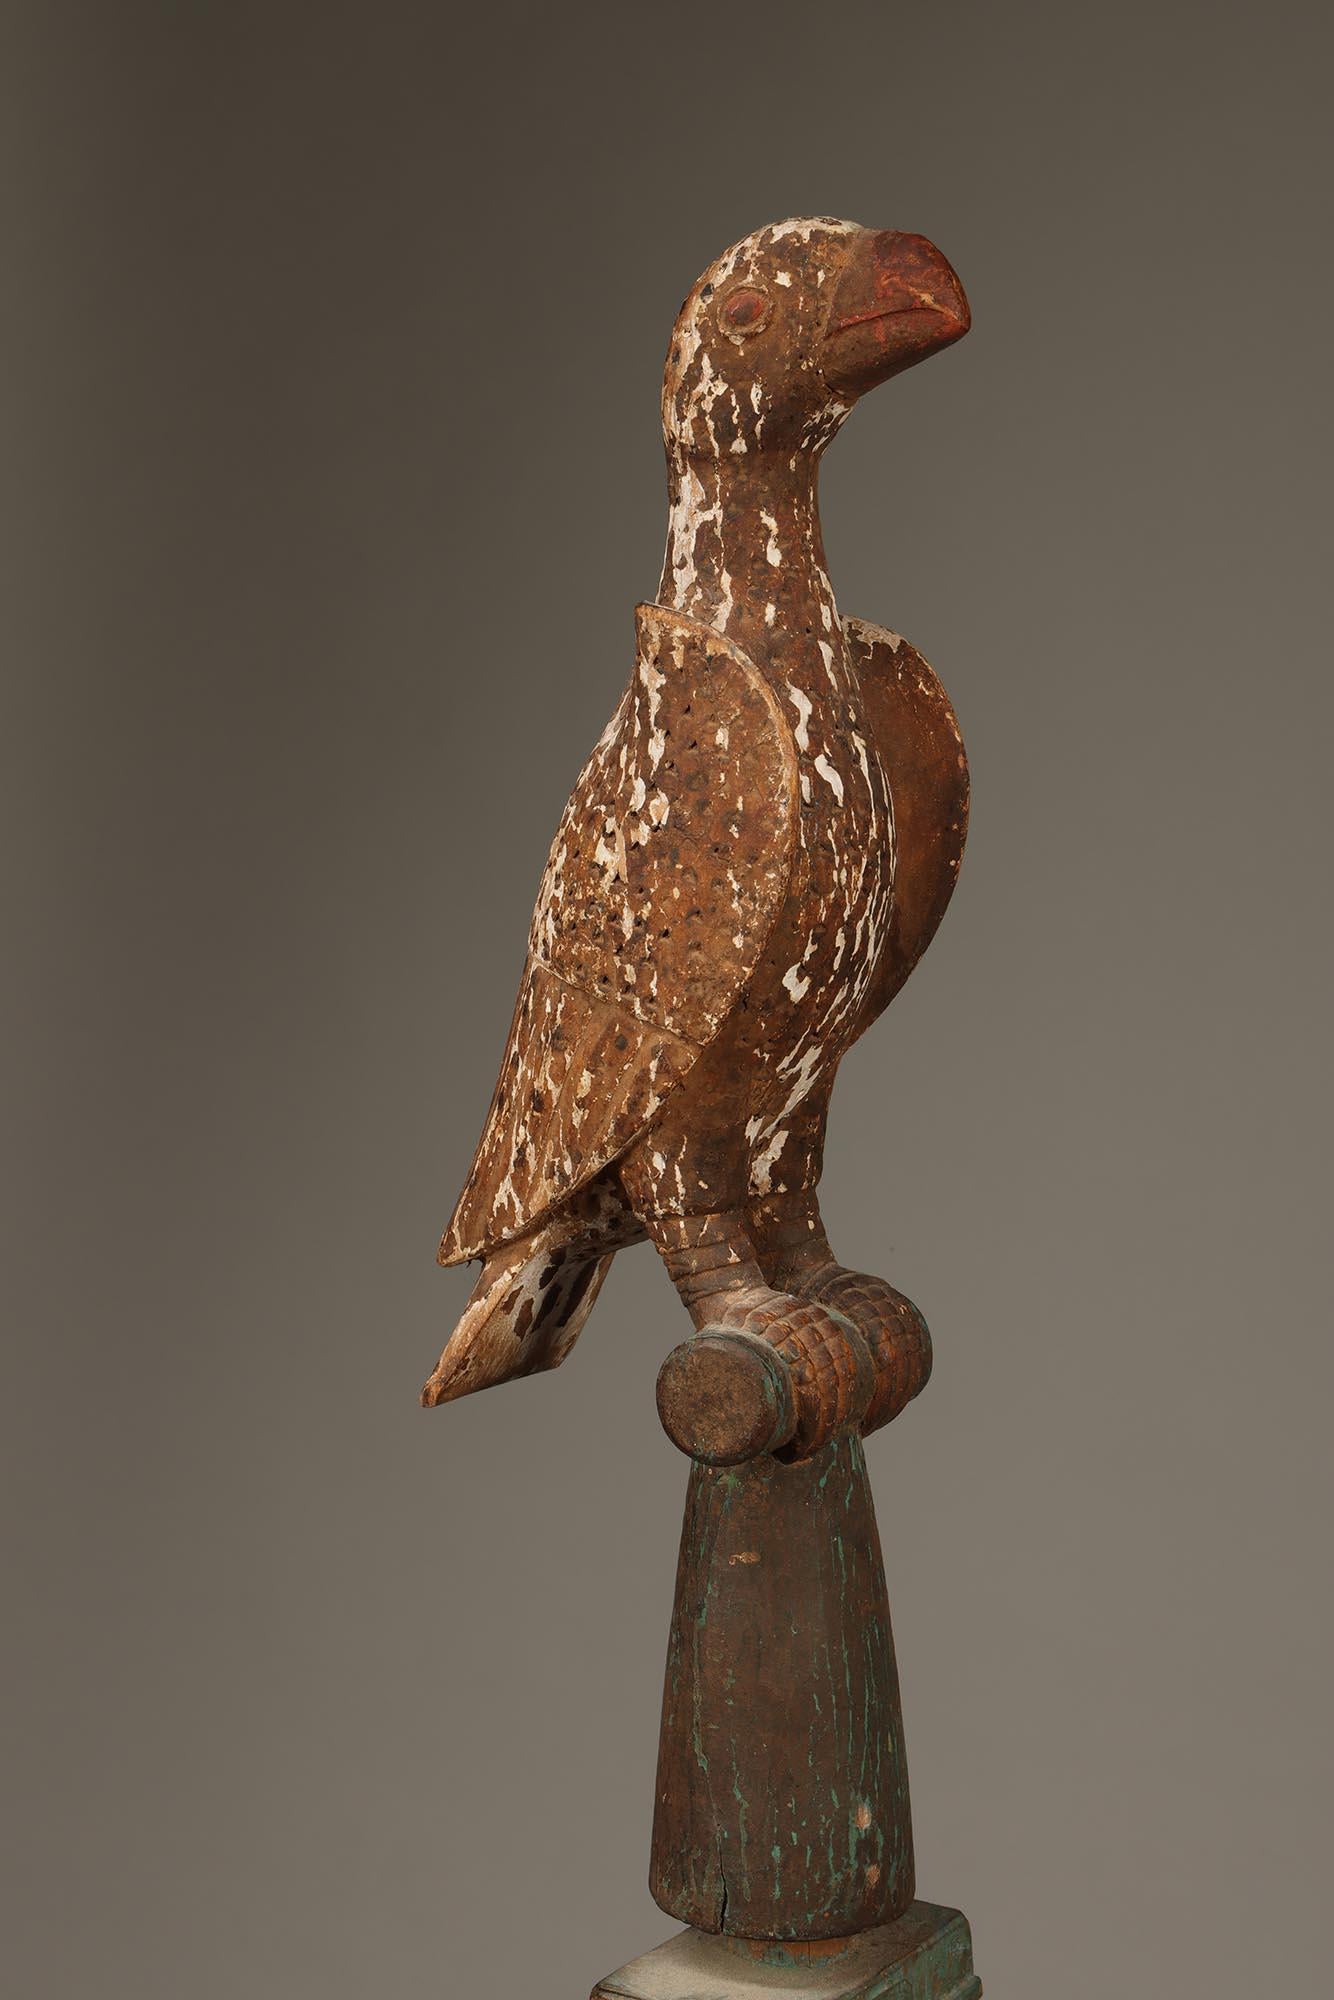 Carved painted wood Ashanti Linguist Staff with bird top and twisted knots forms.  A staff like this was the symbol of office for the linguist, a trained orator who spoke on behalf of the Asante ruler of Ghana.
Staff was carved from separate pieces